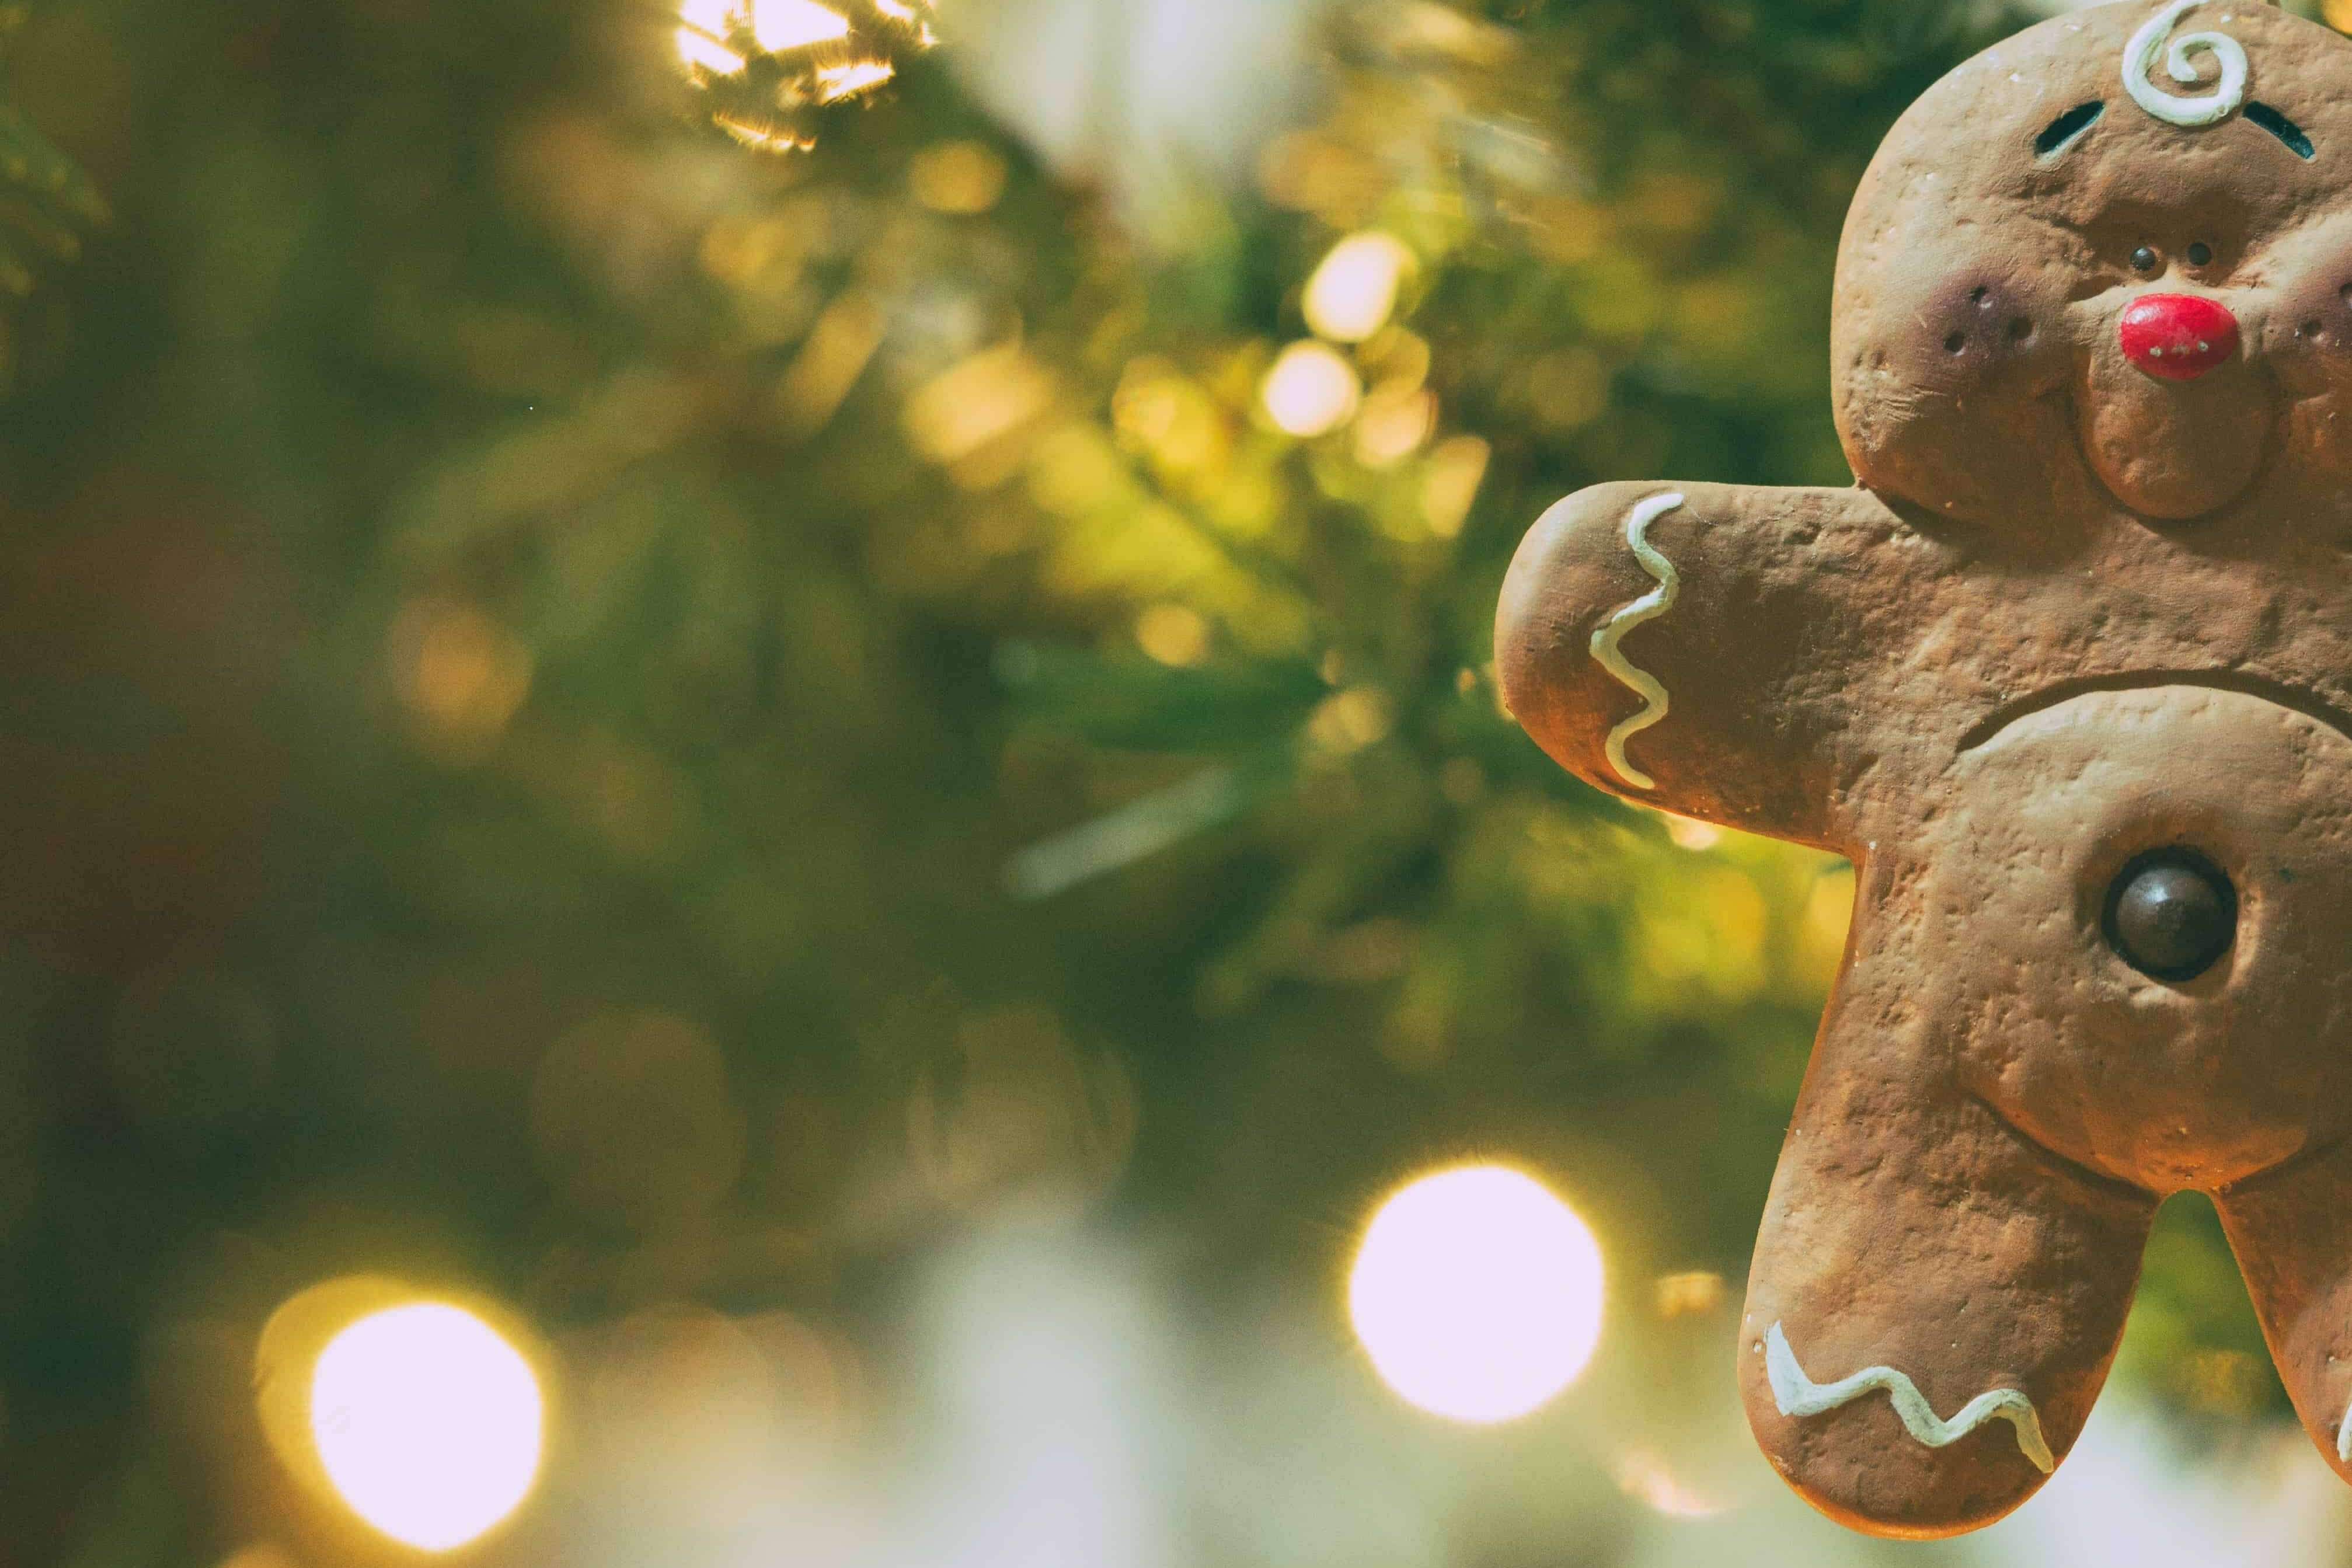 Gingerbread man ornament on evergreen tree with fairy lights